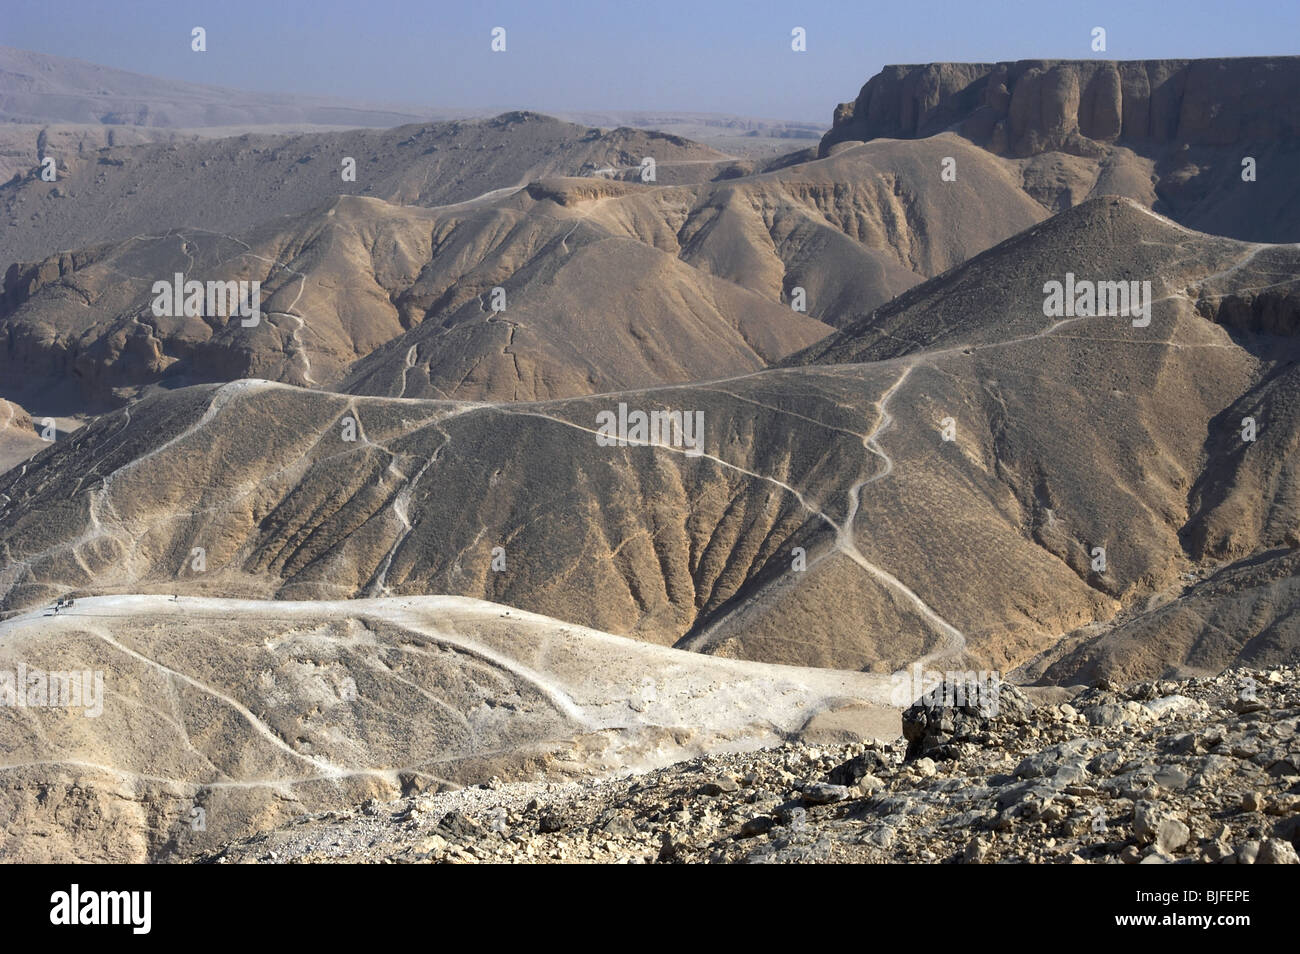 Valley of the Kings. On the walls are carved rock tombs of New Kingdom pharaohs. Egypt. Stock Photo